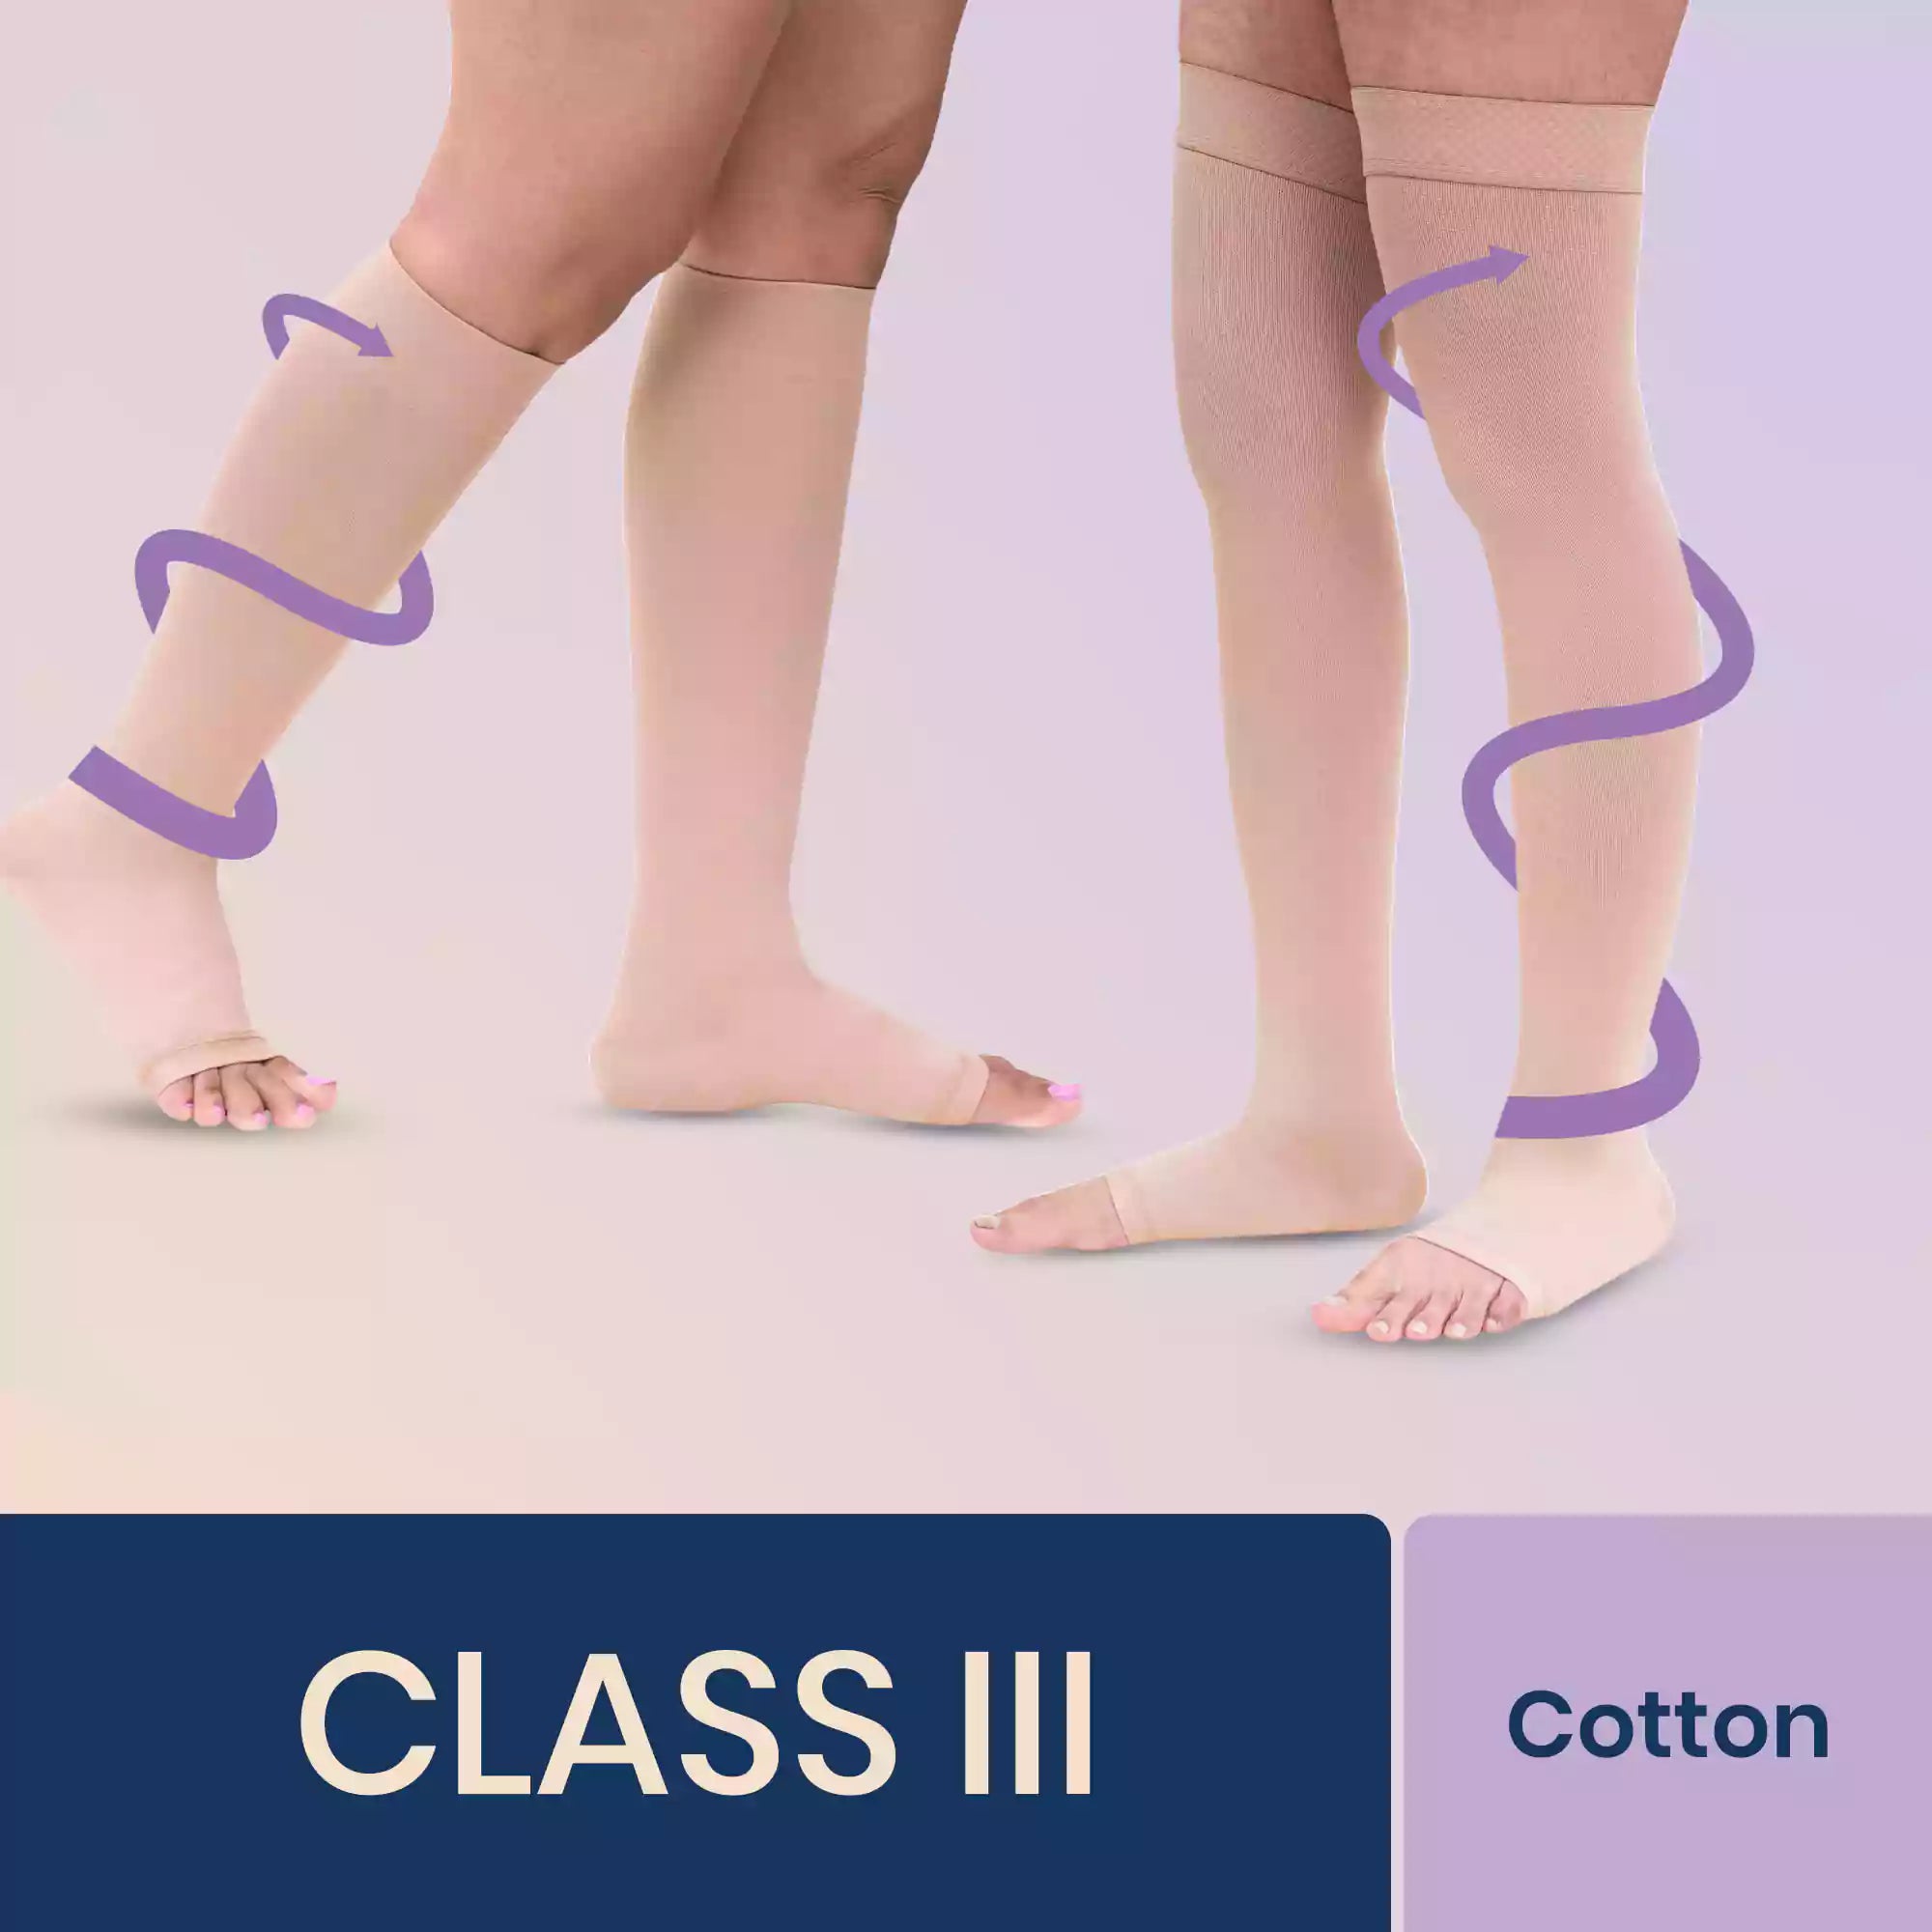 Sorgen Class II Classique Lycra Medical Compression Stockings for Varicose  Veins